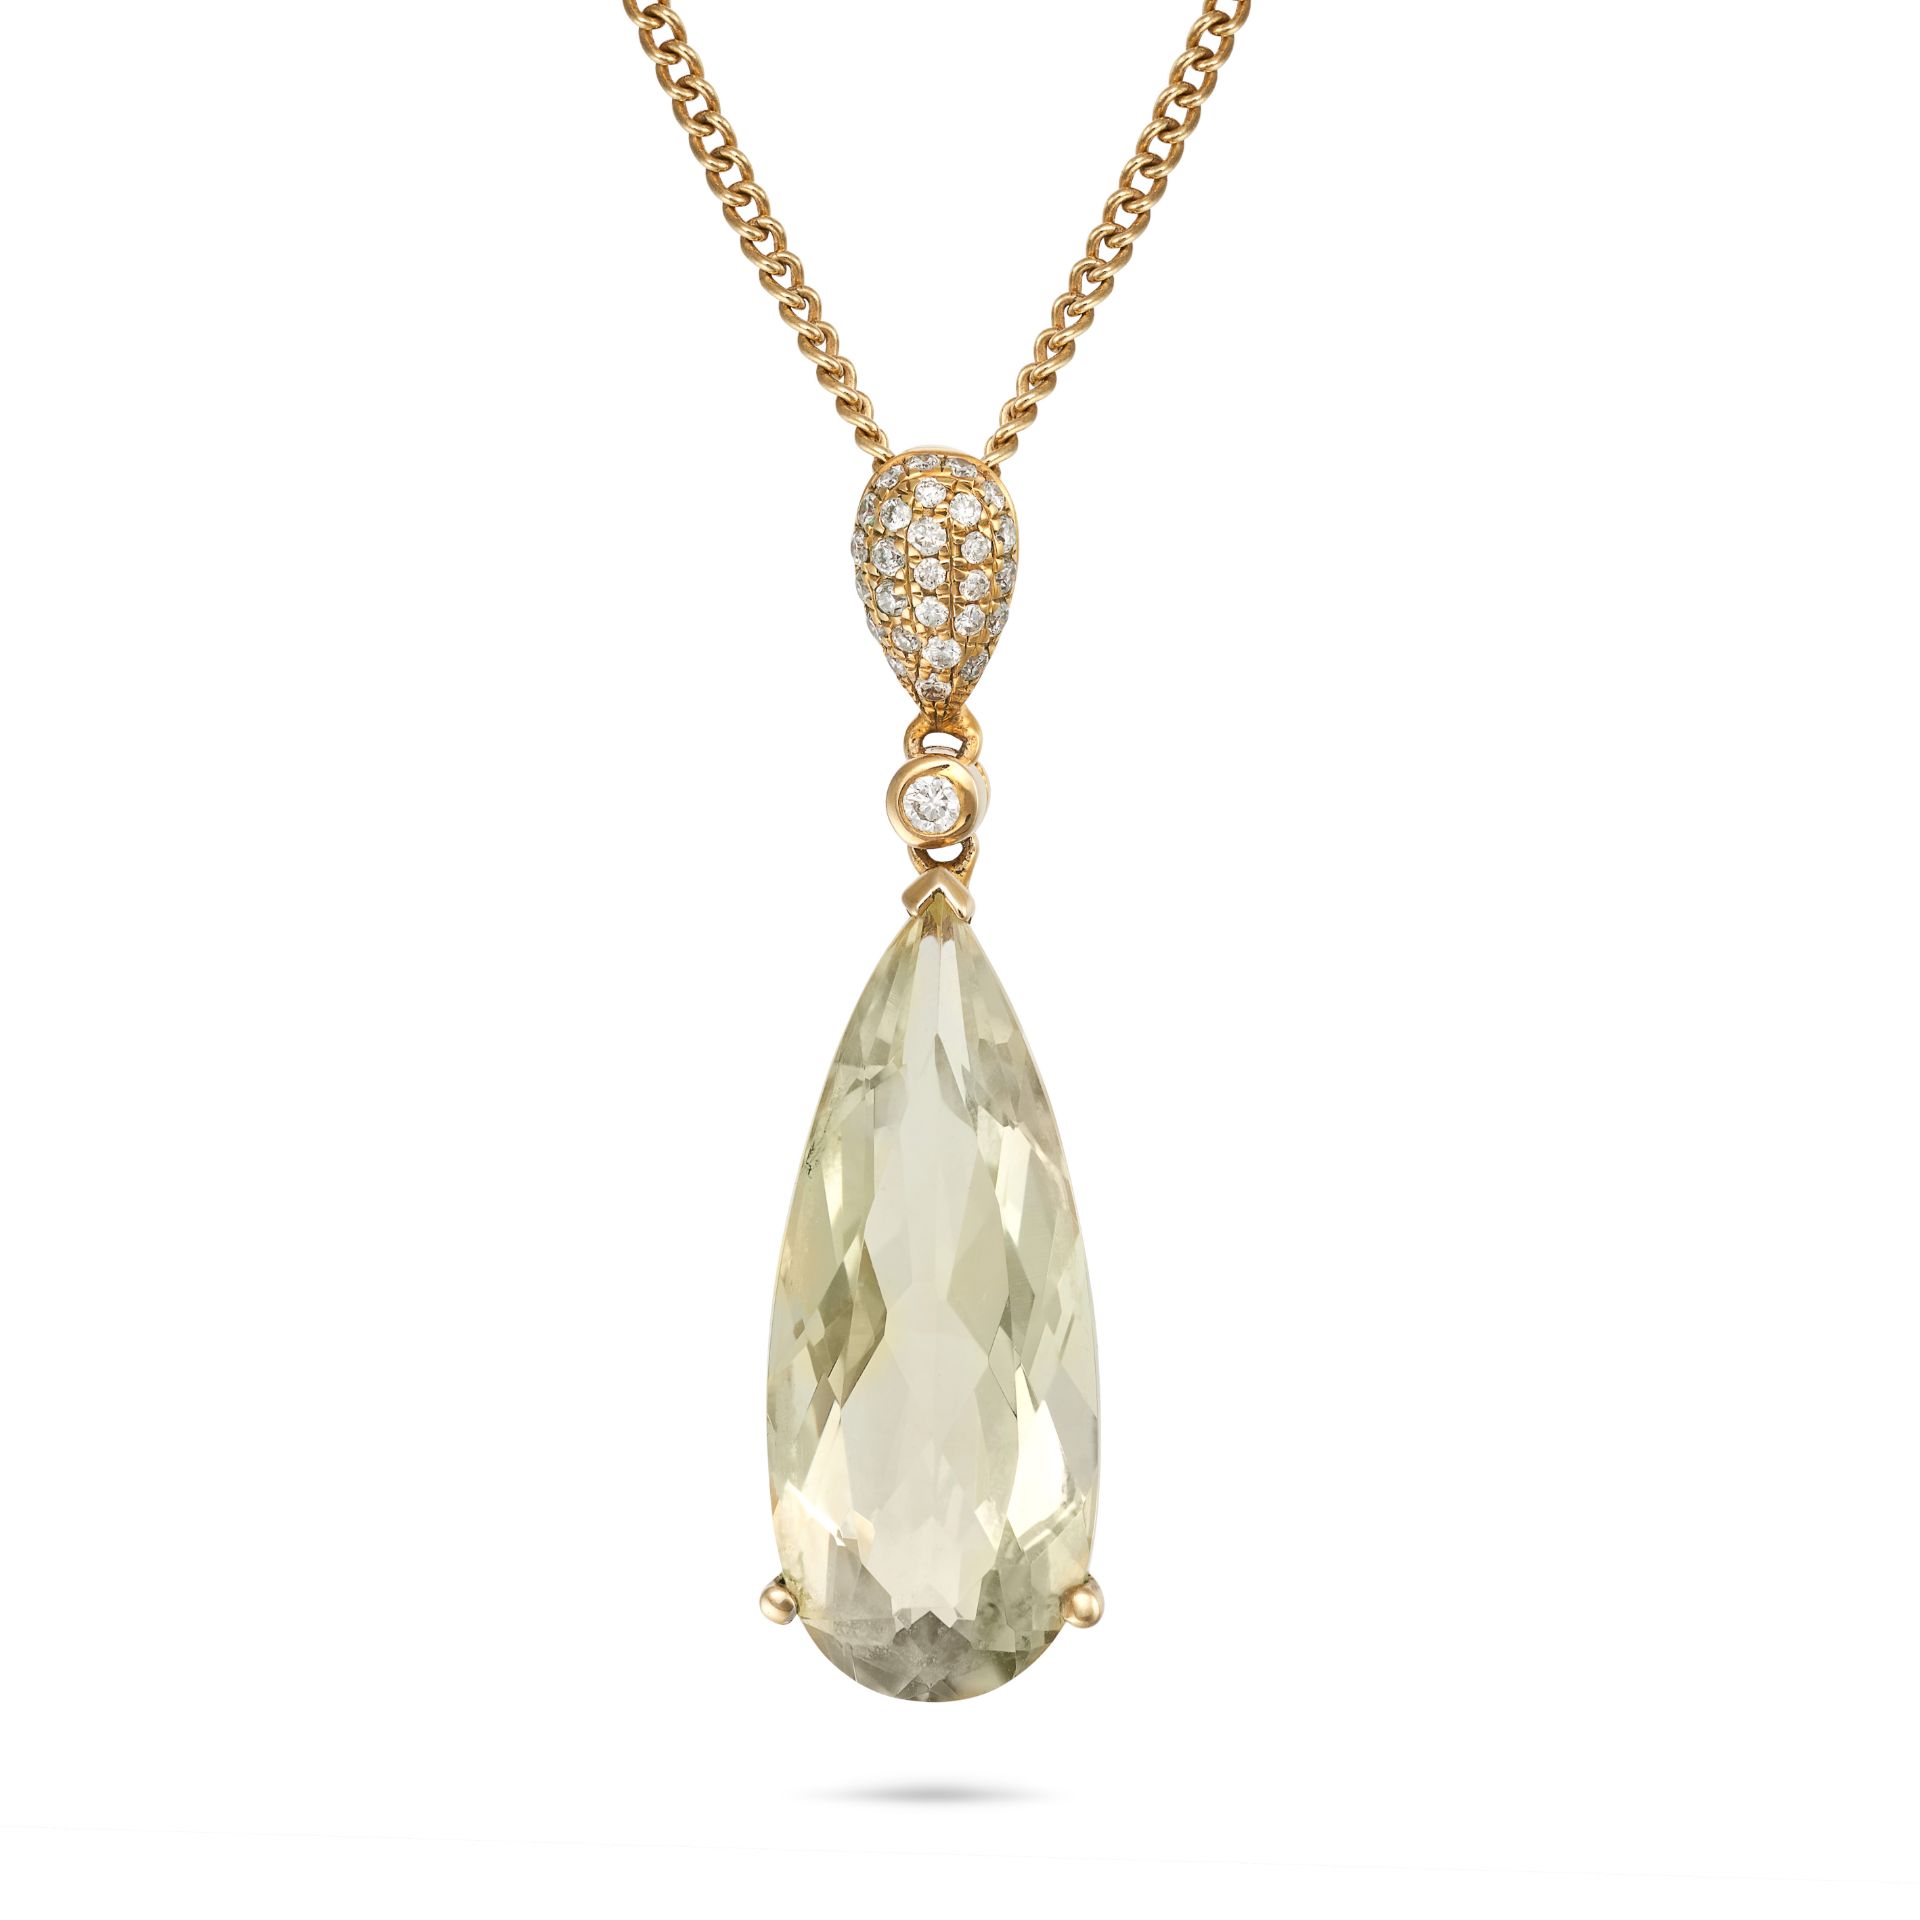 A HELIODOR AND DIAMOND PENDANT NECKLACE in 18ct yellow gold, the pendant set with a pear cut heli...